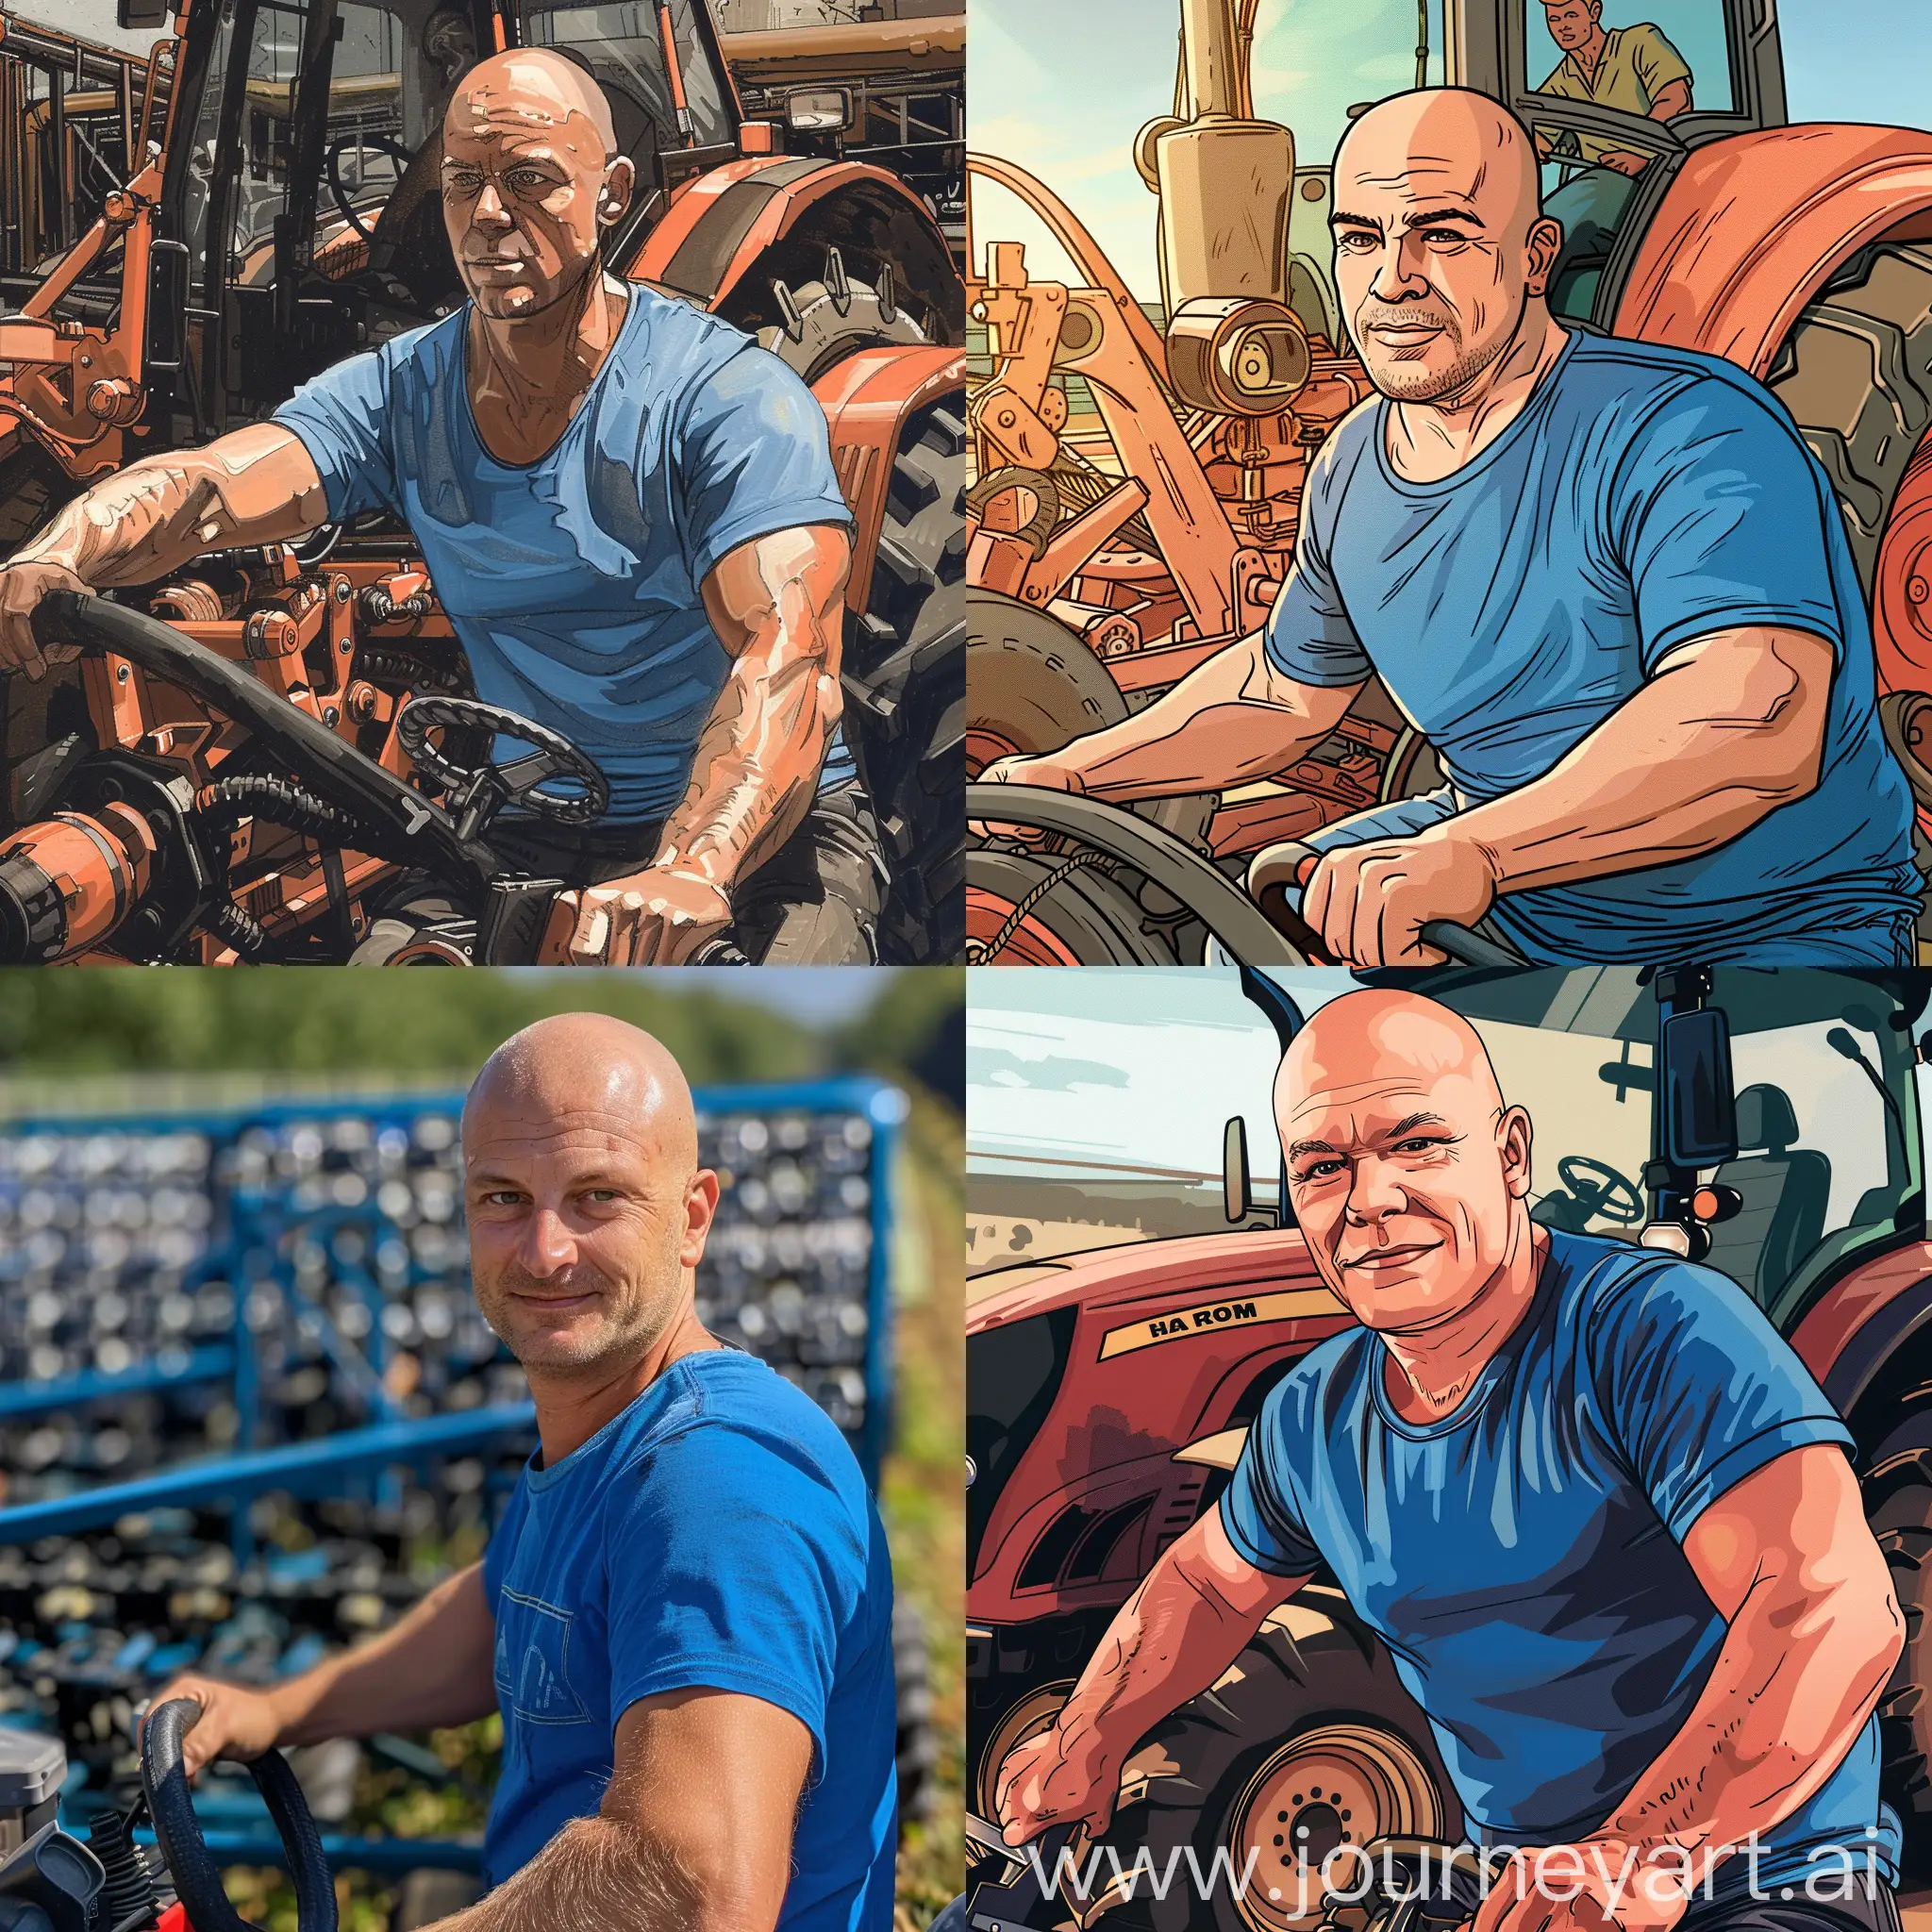 An attractive bald man wearing a blue t-shirt and riding a tractor works on a bitcoin farm.